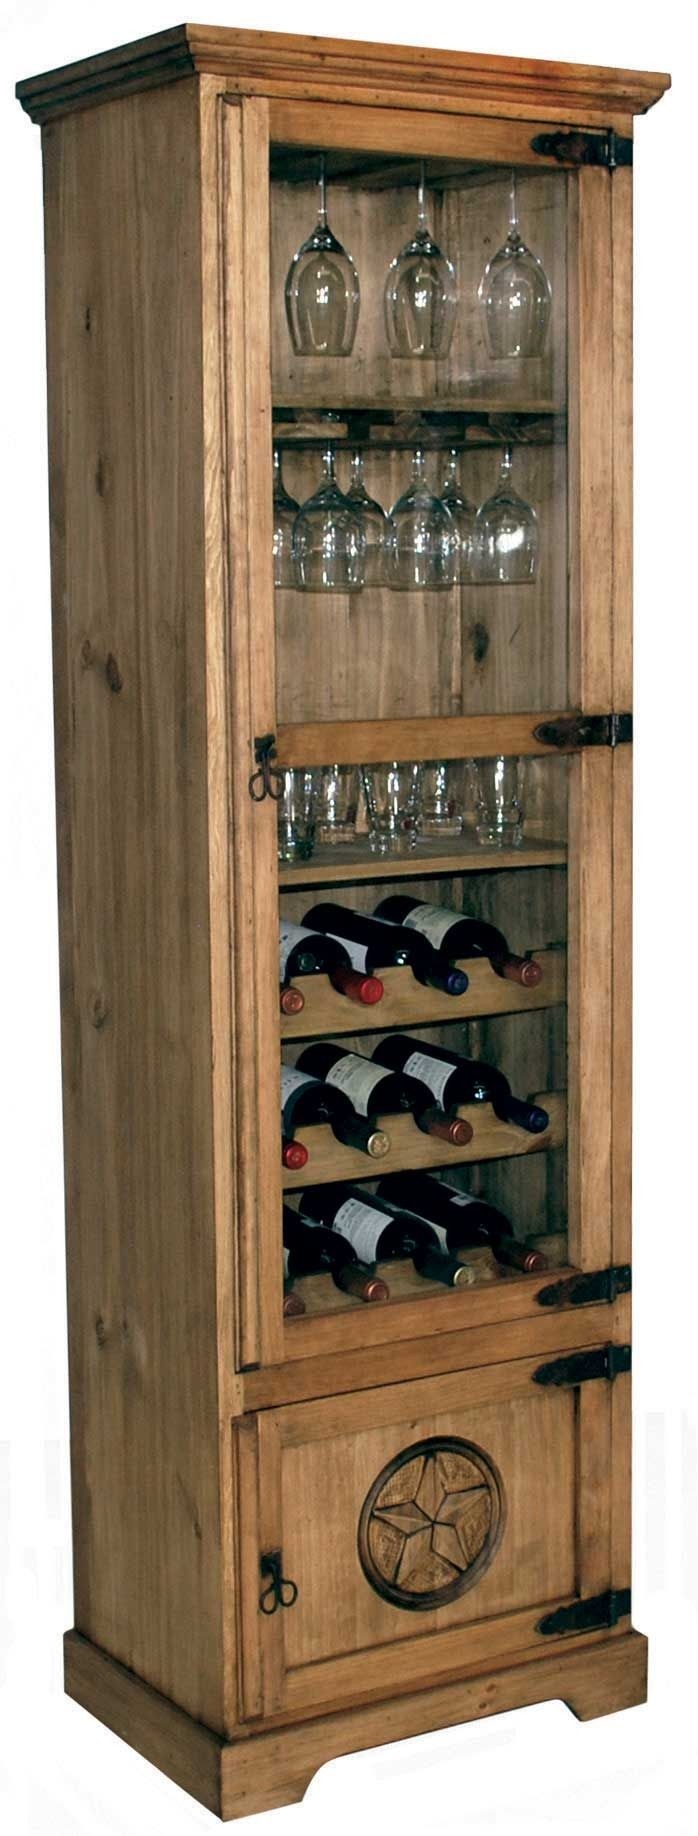 Rustic wine cabinet rustic wine tall cabinet with star